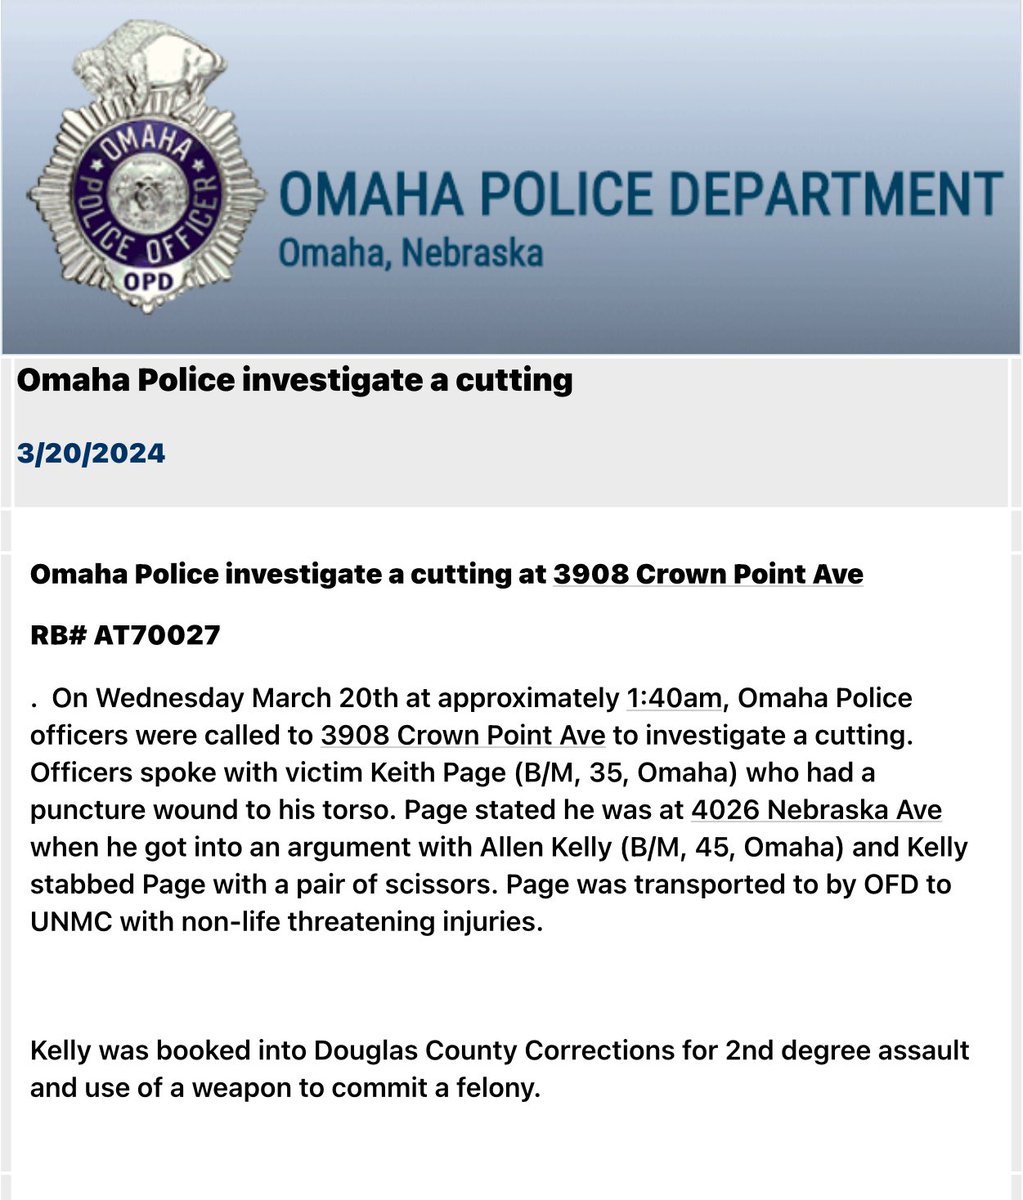 OmahaPolice investigating an early morning cutting after one person was stabbed with scissors. The suspect, Allen Kelly, was booked into DCC for 2nd degree assault and use of a weapon to commit a felony